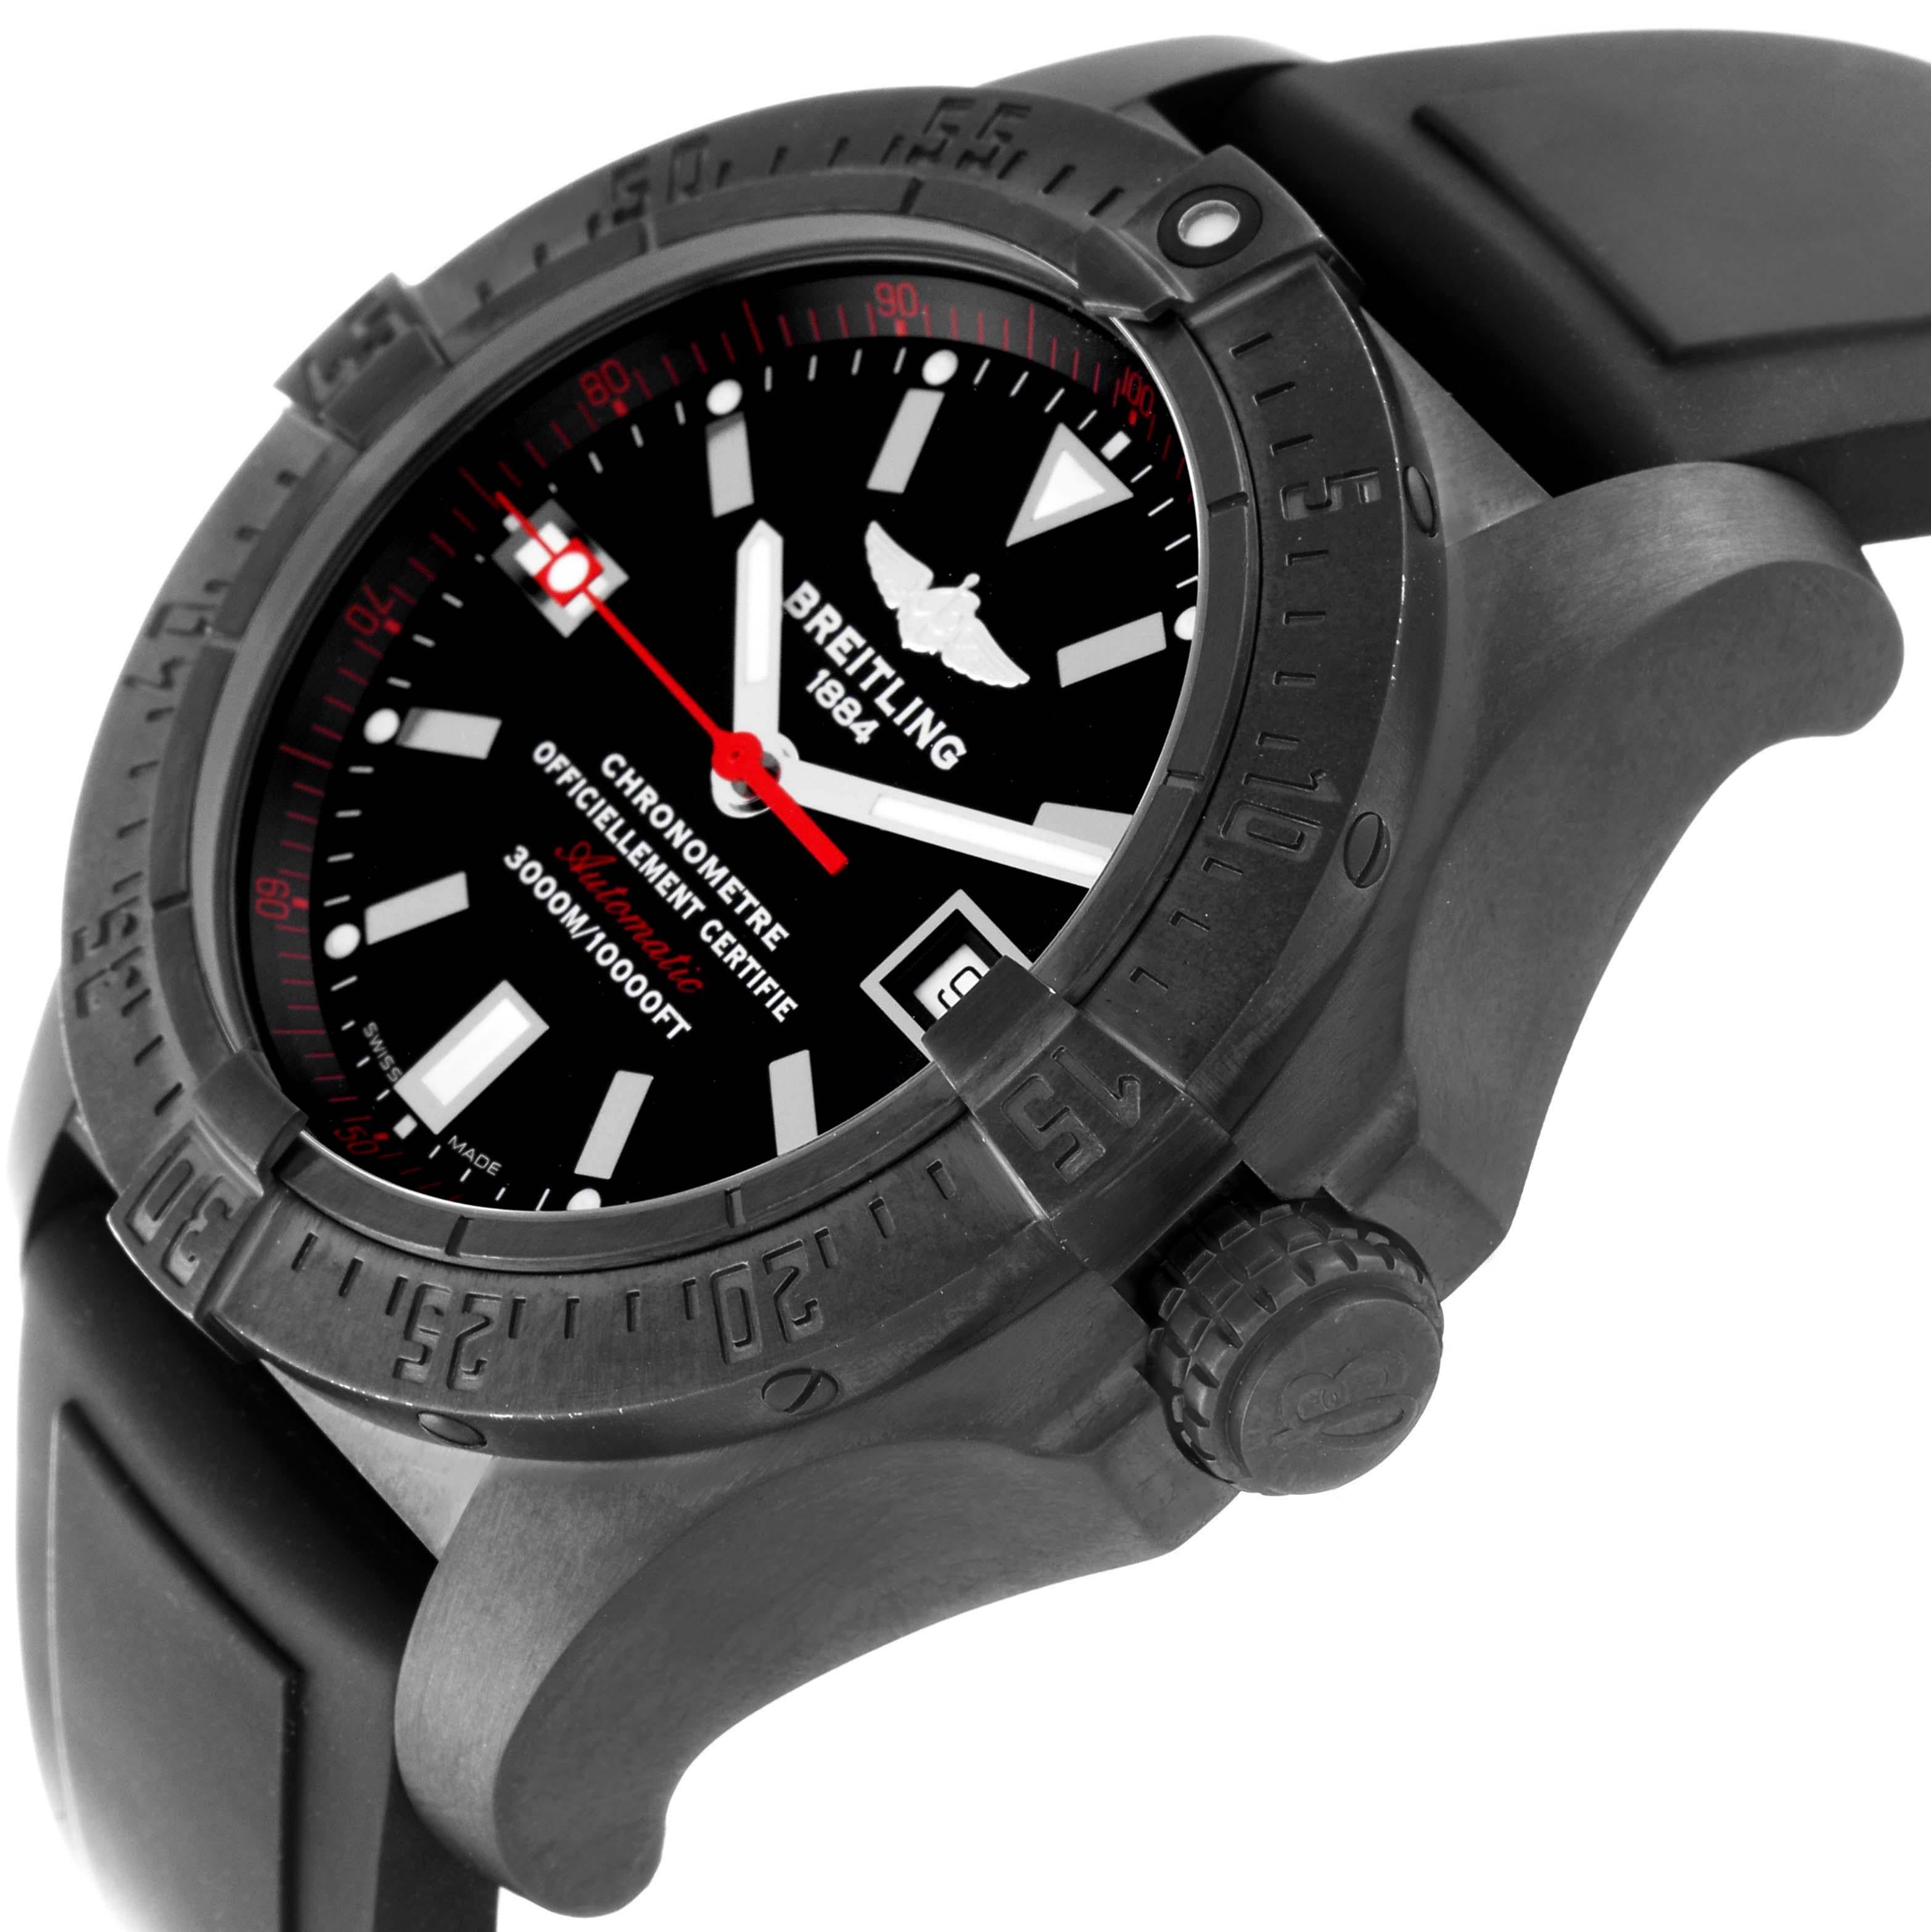 Montre homme Breitling Avenger Seawolf Code Red Blacksteel Limited Edition 5